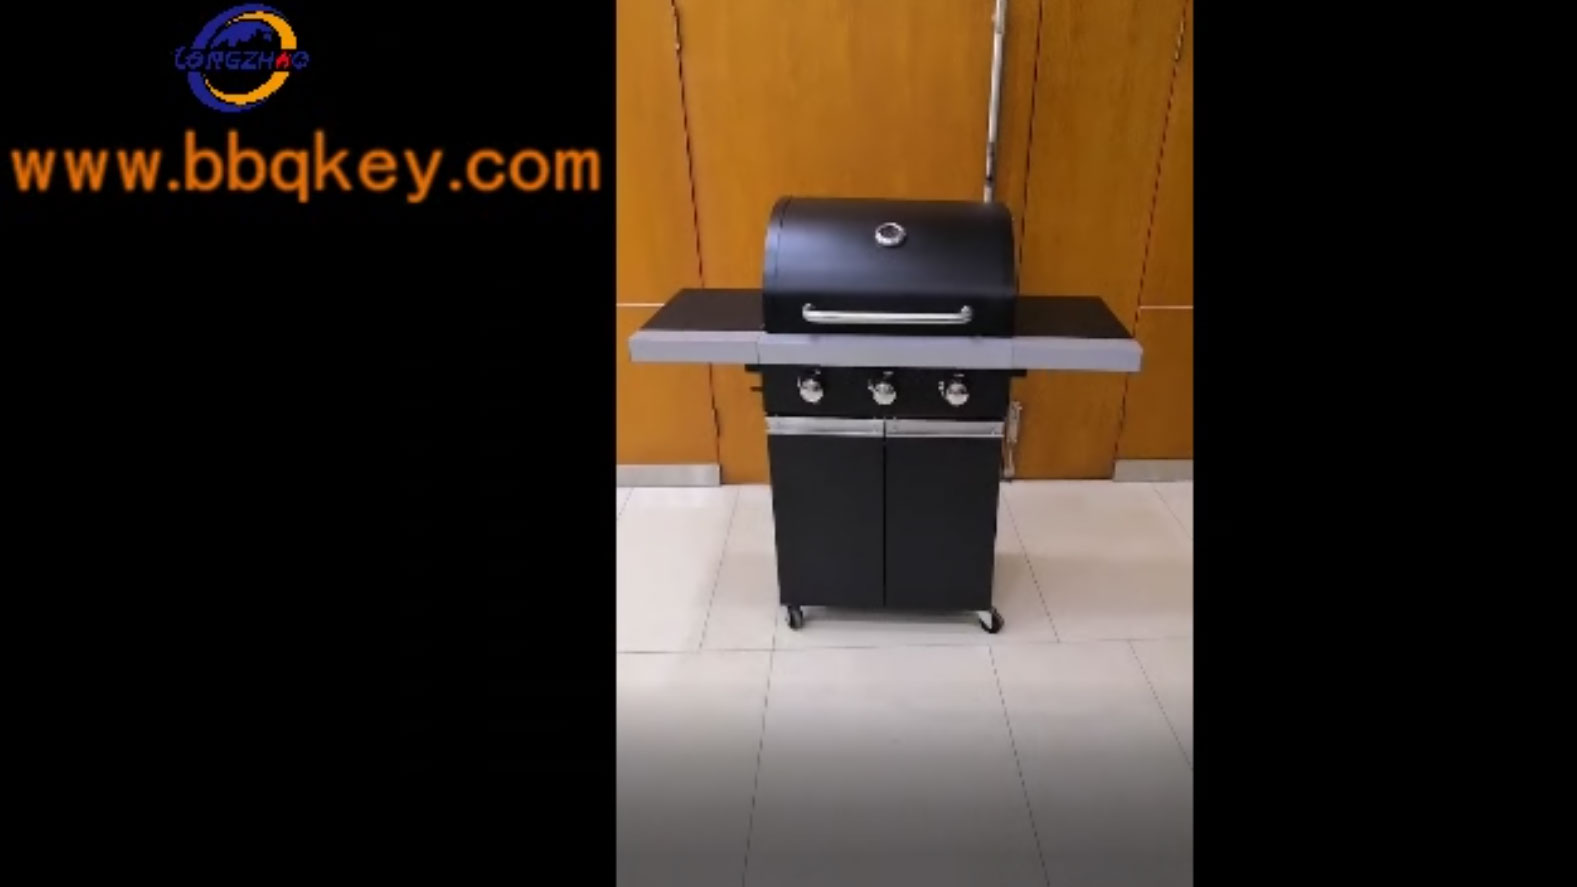 indoor bbq grill How to Grill the Perfect Steak on a George Foreman Grill